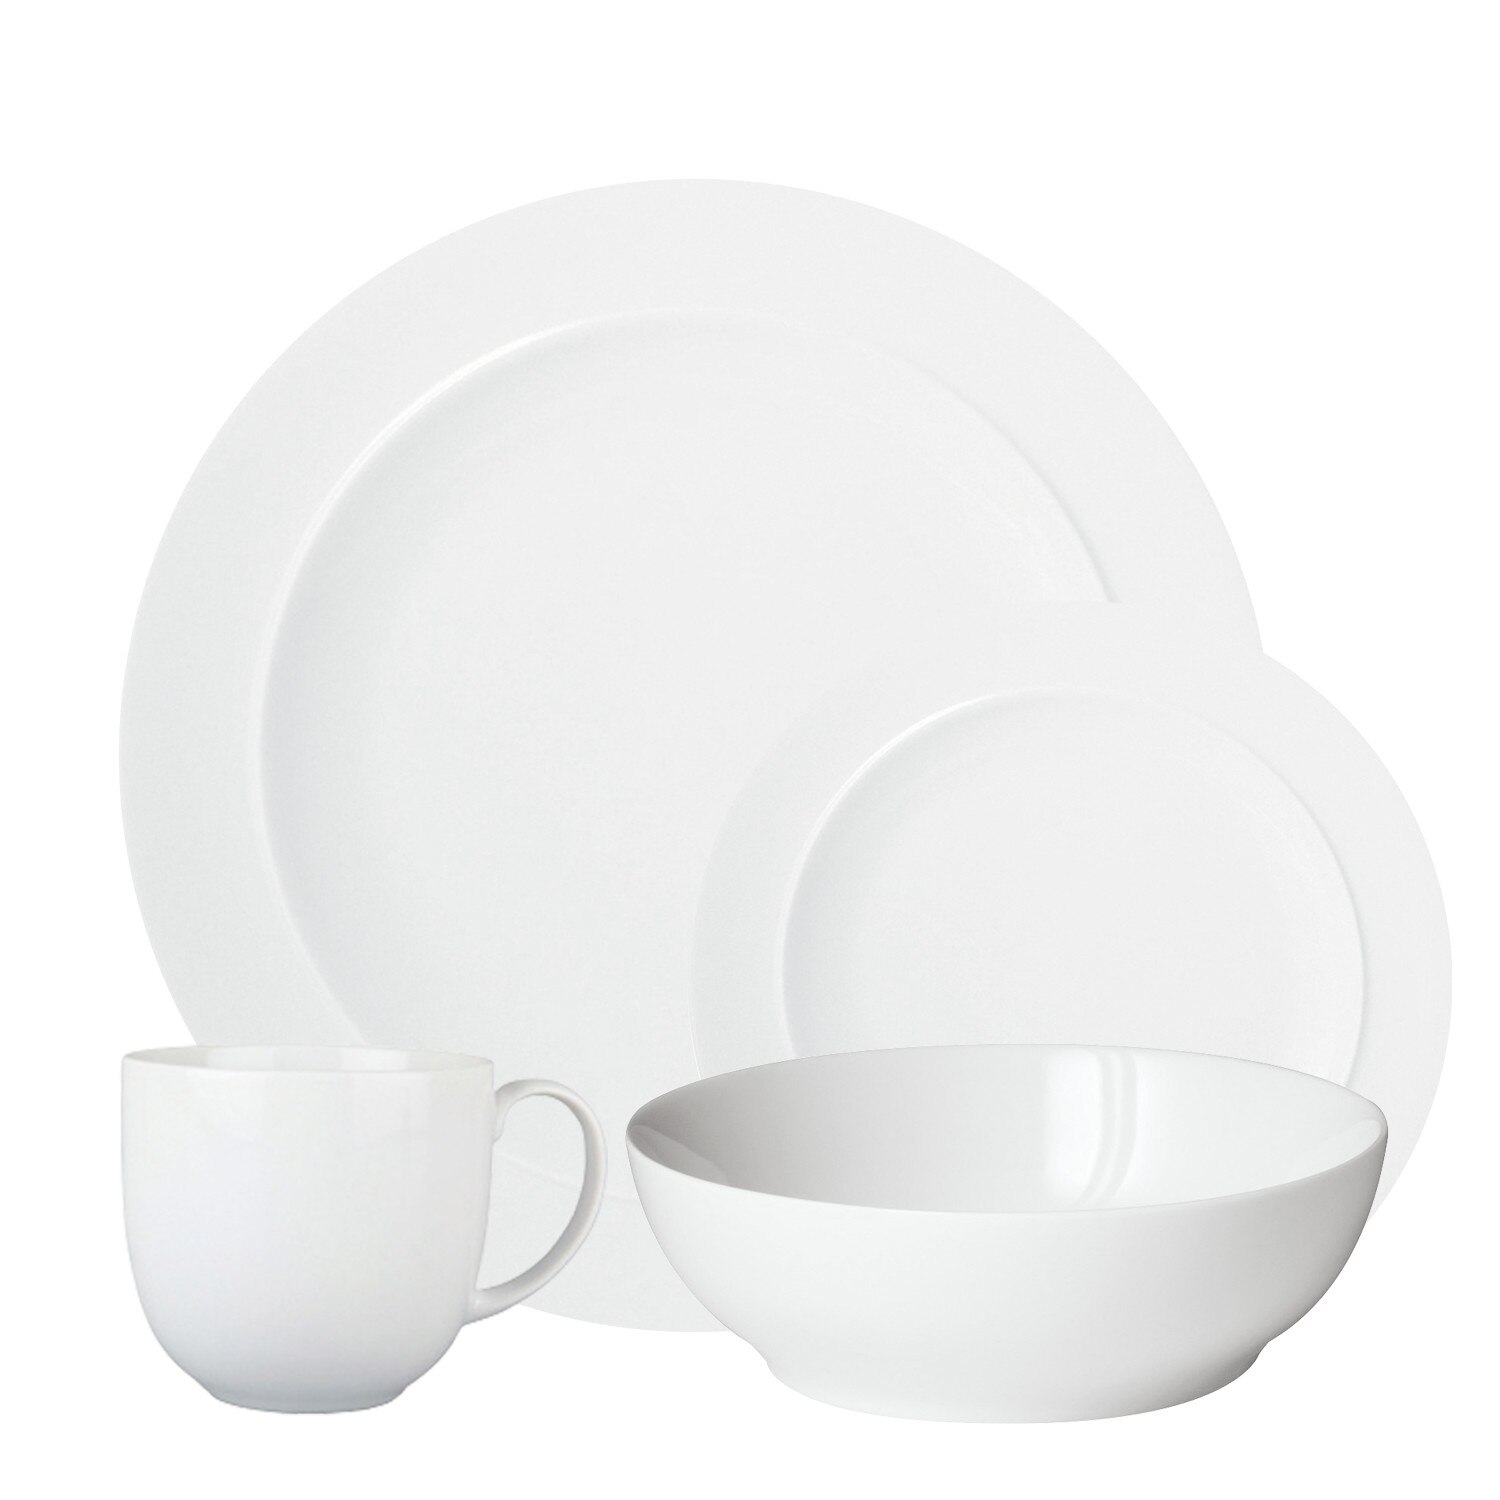 China by Denby 4-piece Place Setting Service for 1